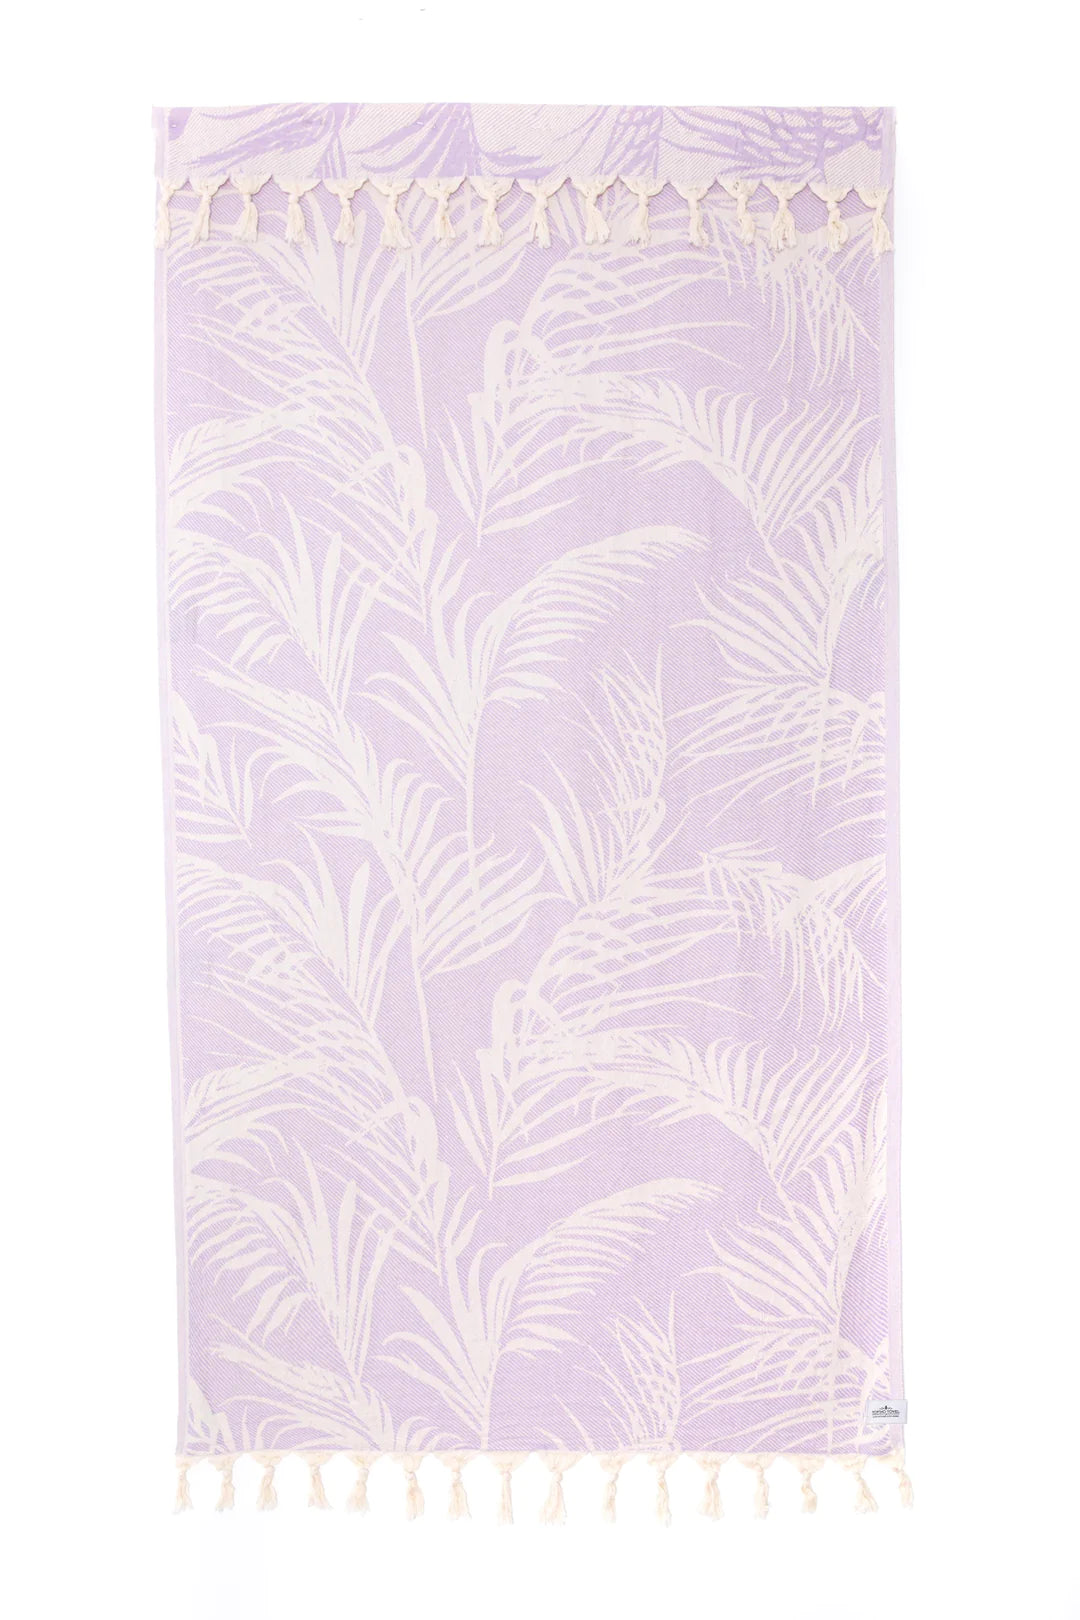 The Serenity Towel - Wild and Heart